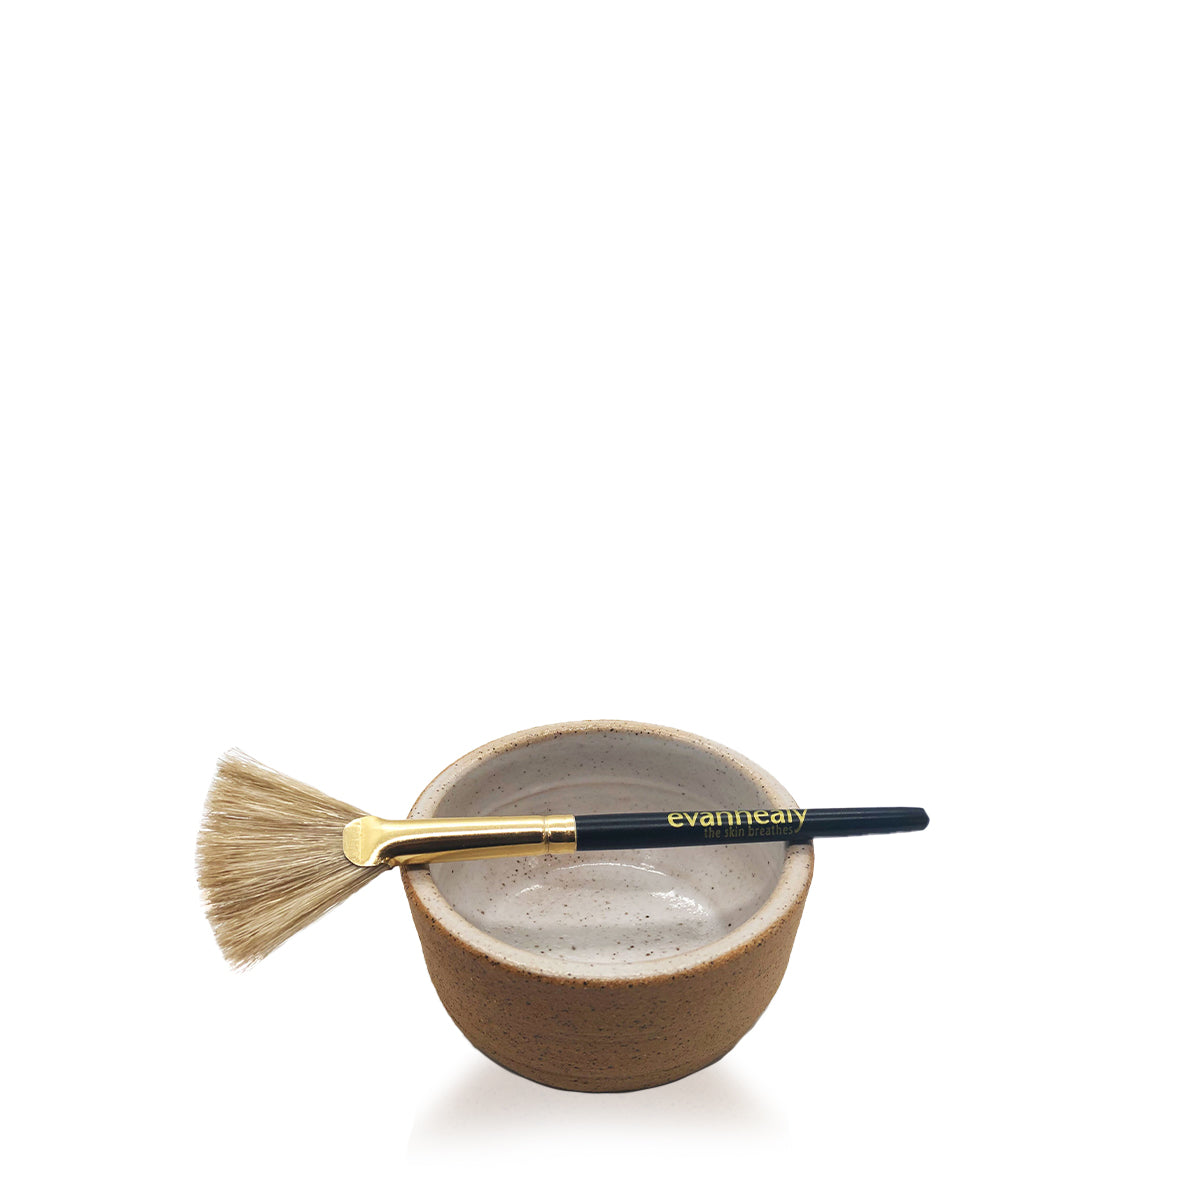 clay mixing bowl with evan healy fan mask brush